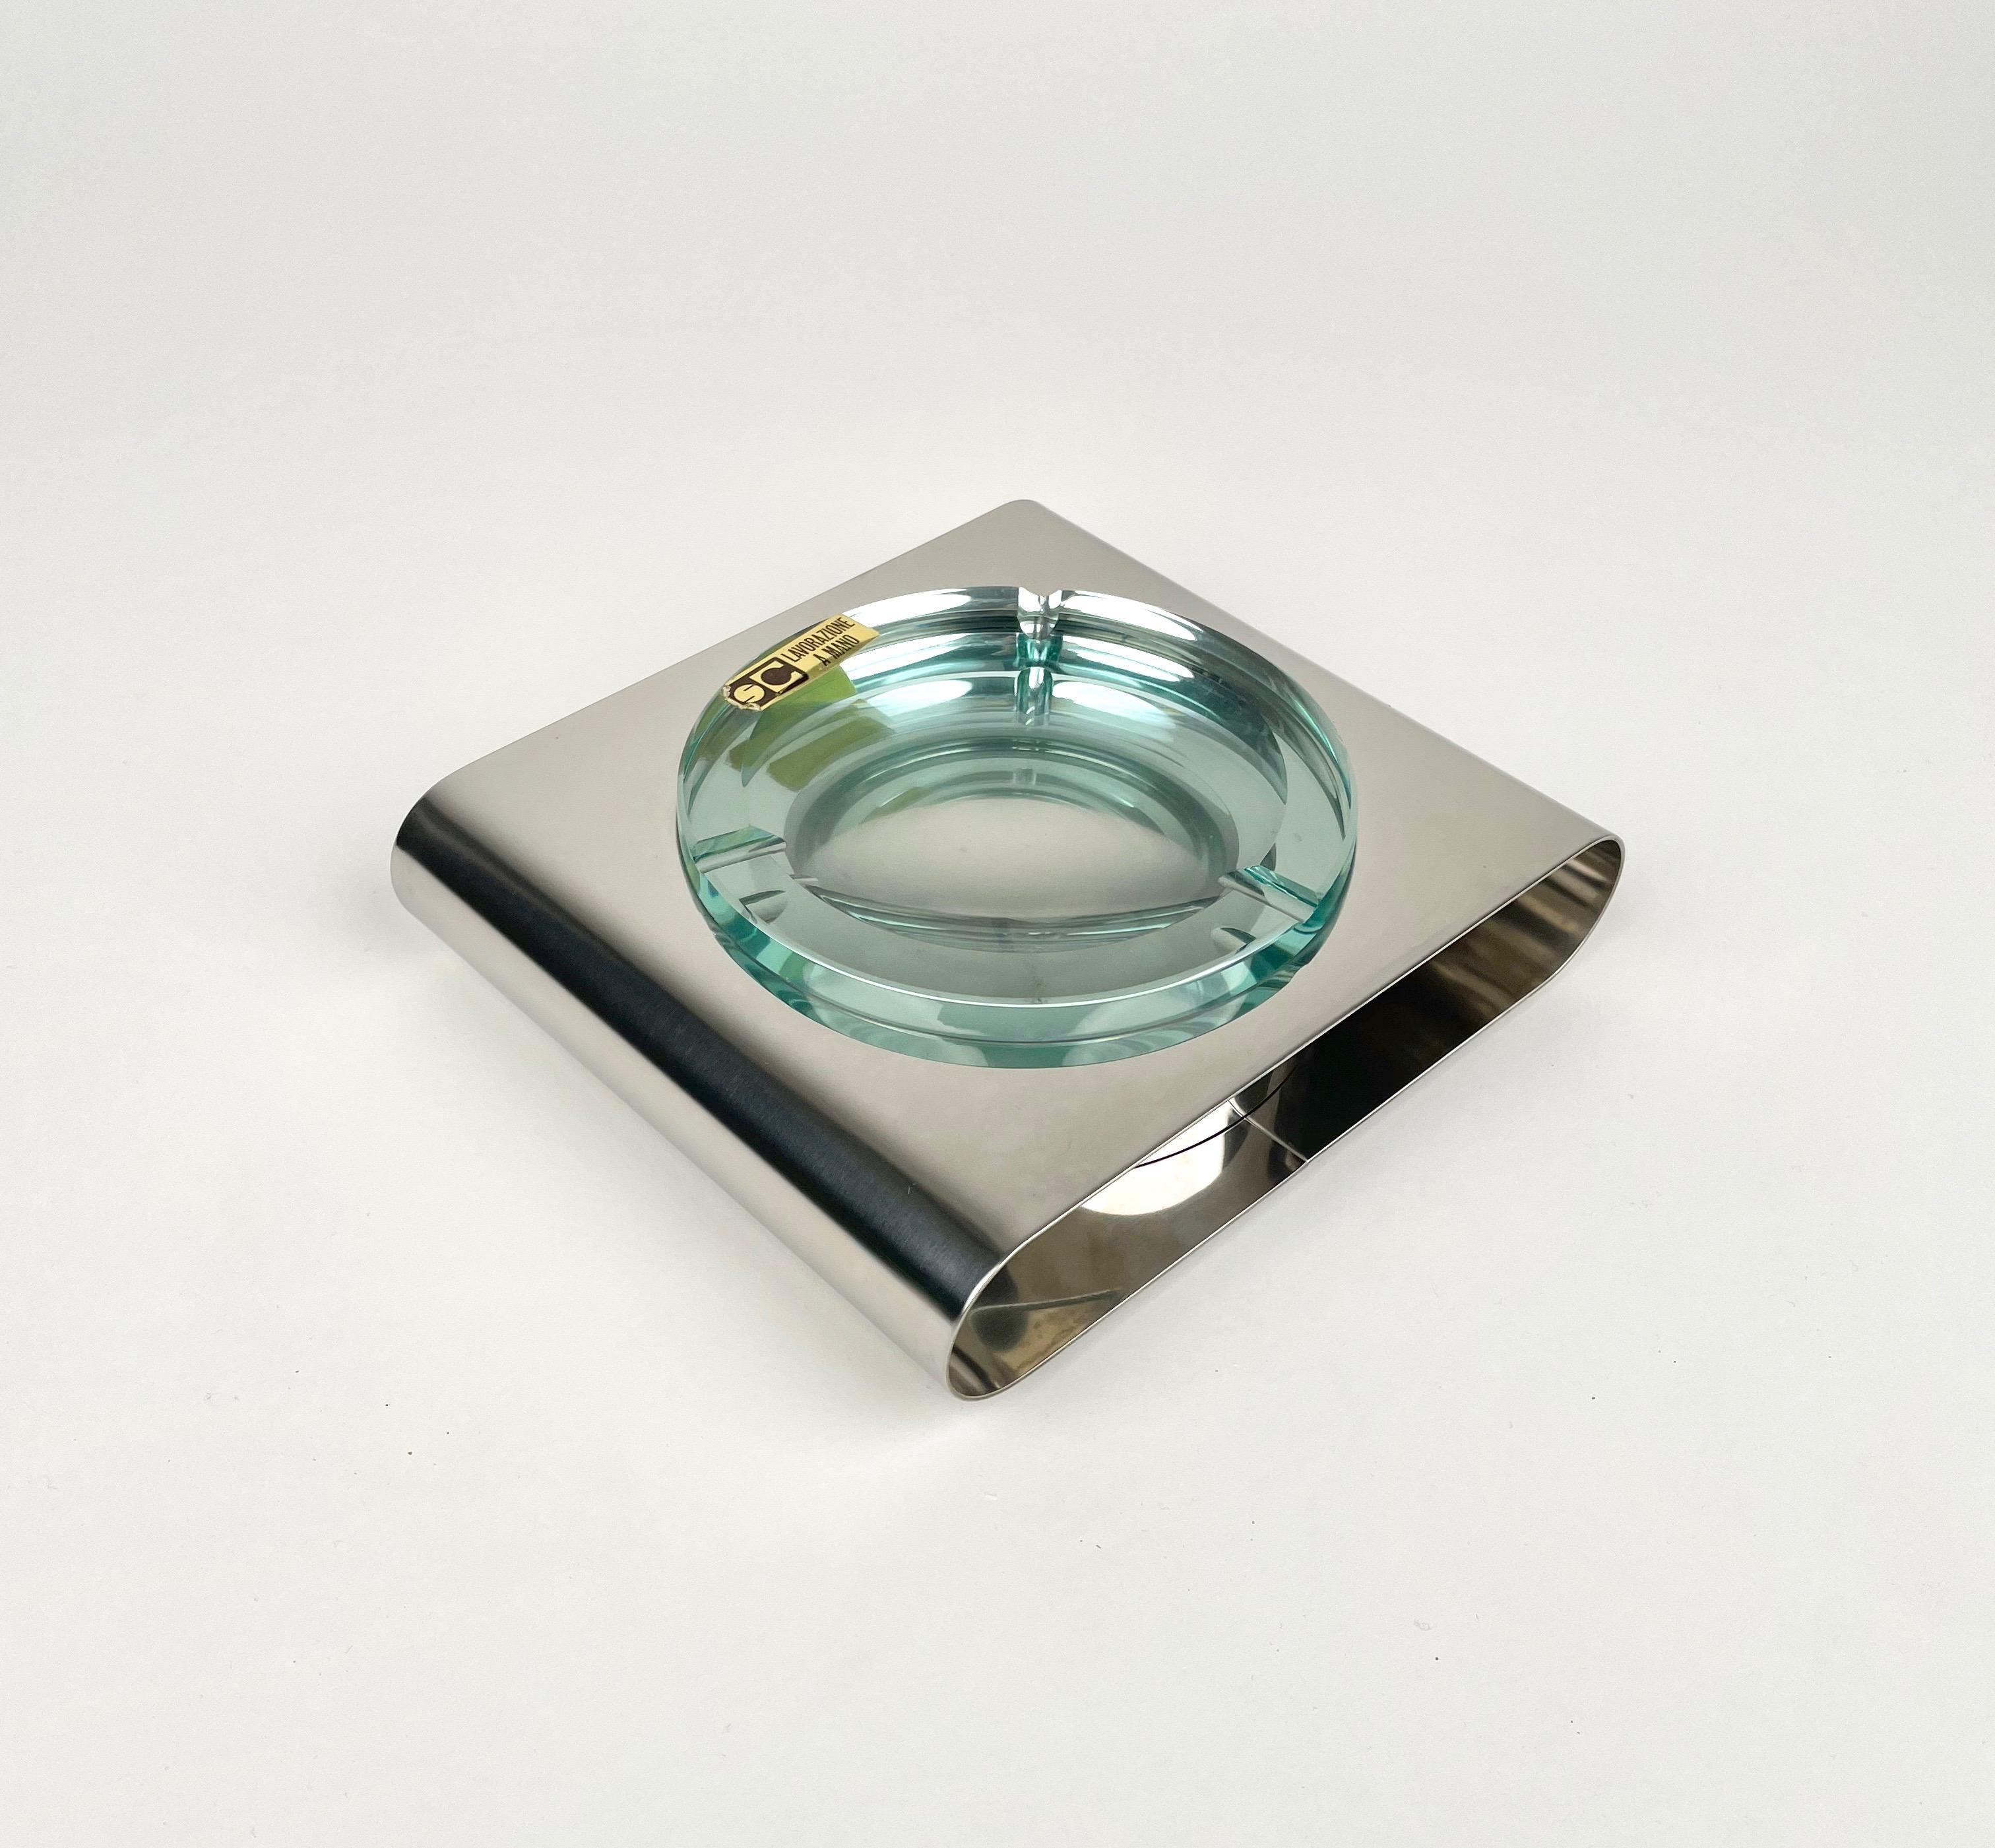 Ashtray Sena Cristal Steel and Green Glass, Italy, 1970s For Sale 1